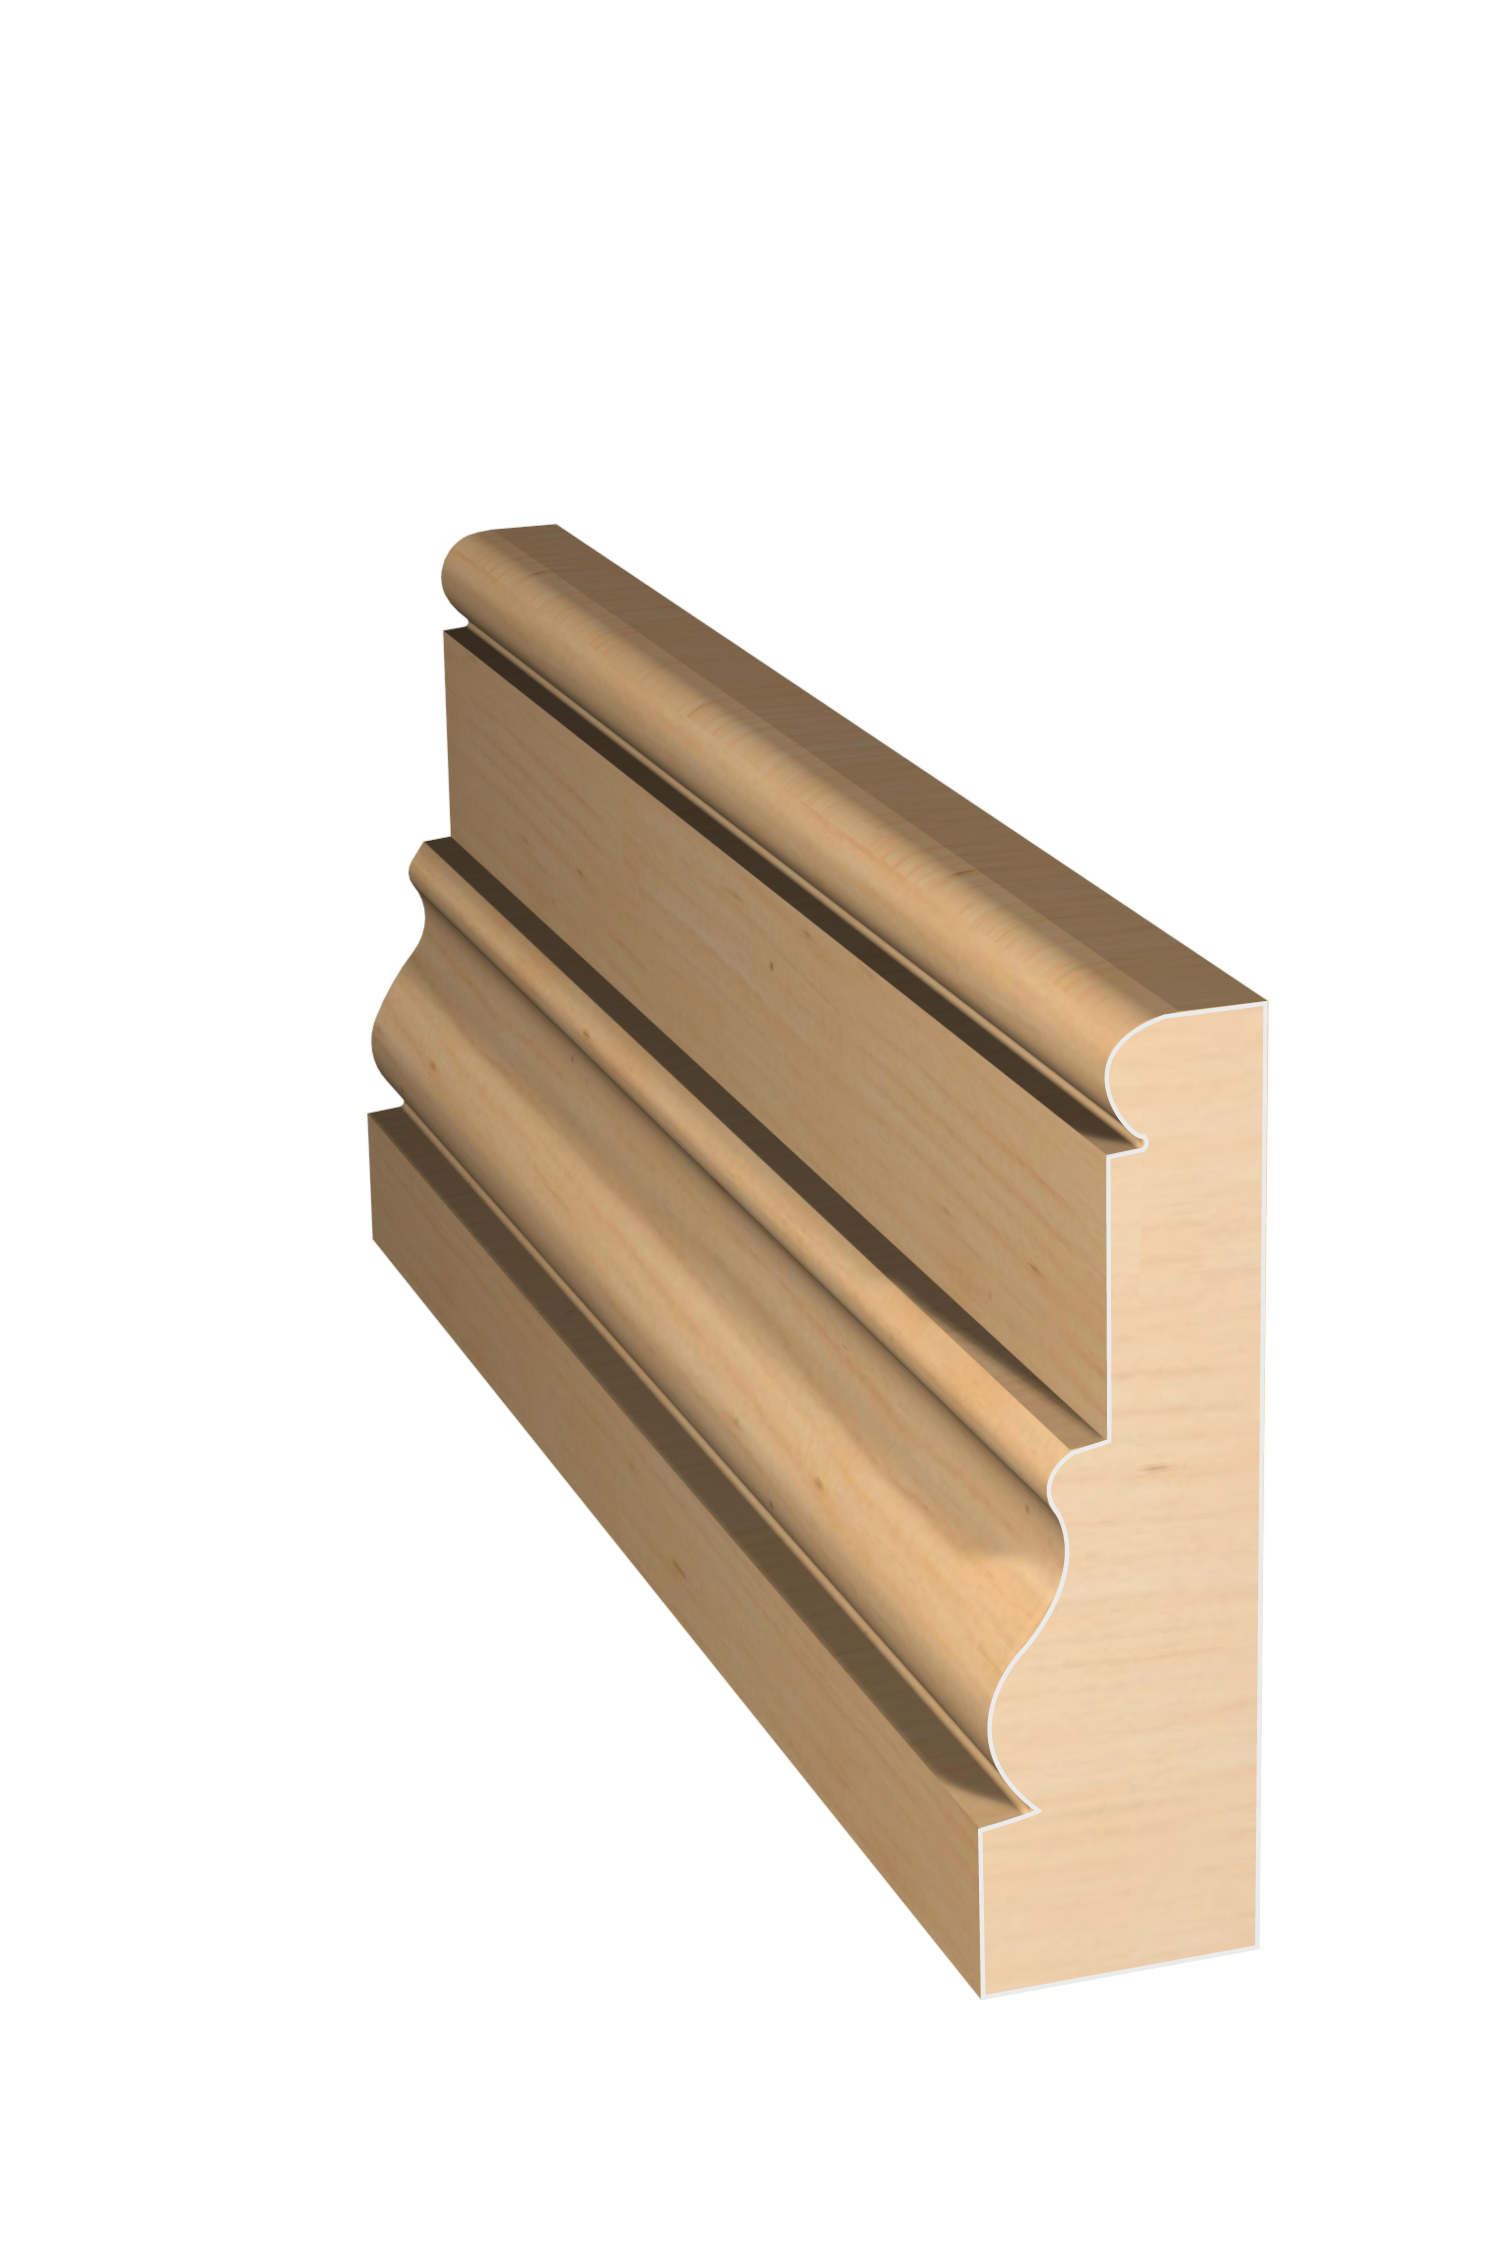 Three dimensional rendering of custom casing wood molding CAPL2123 made by Public Lumber Company in Detroit.